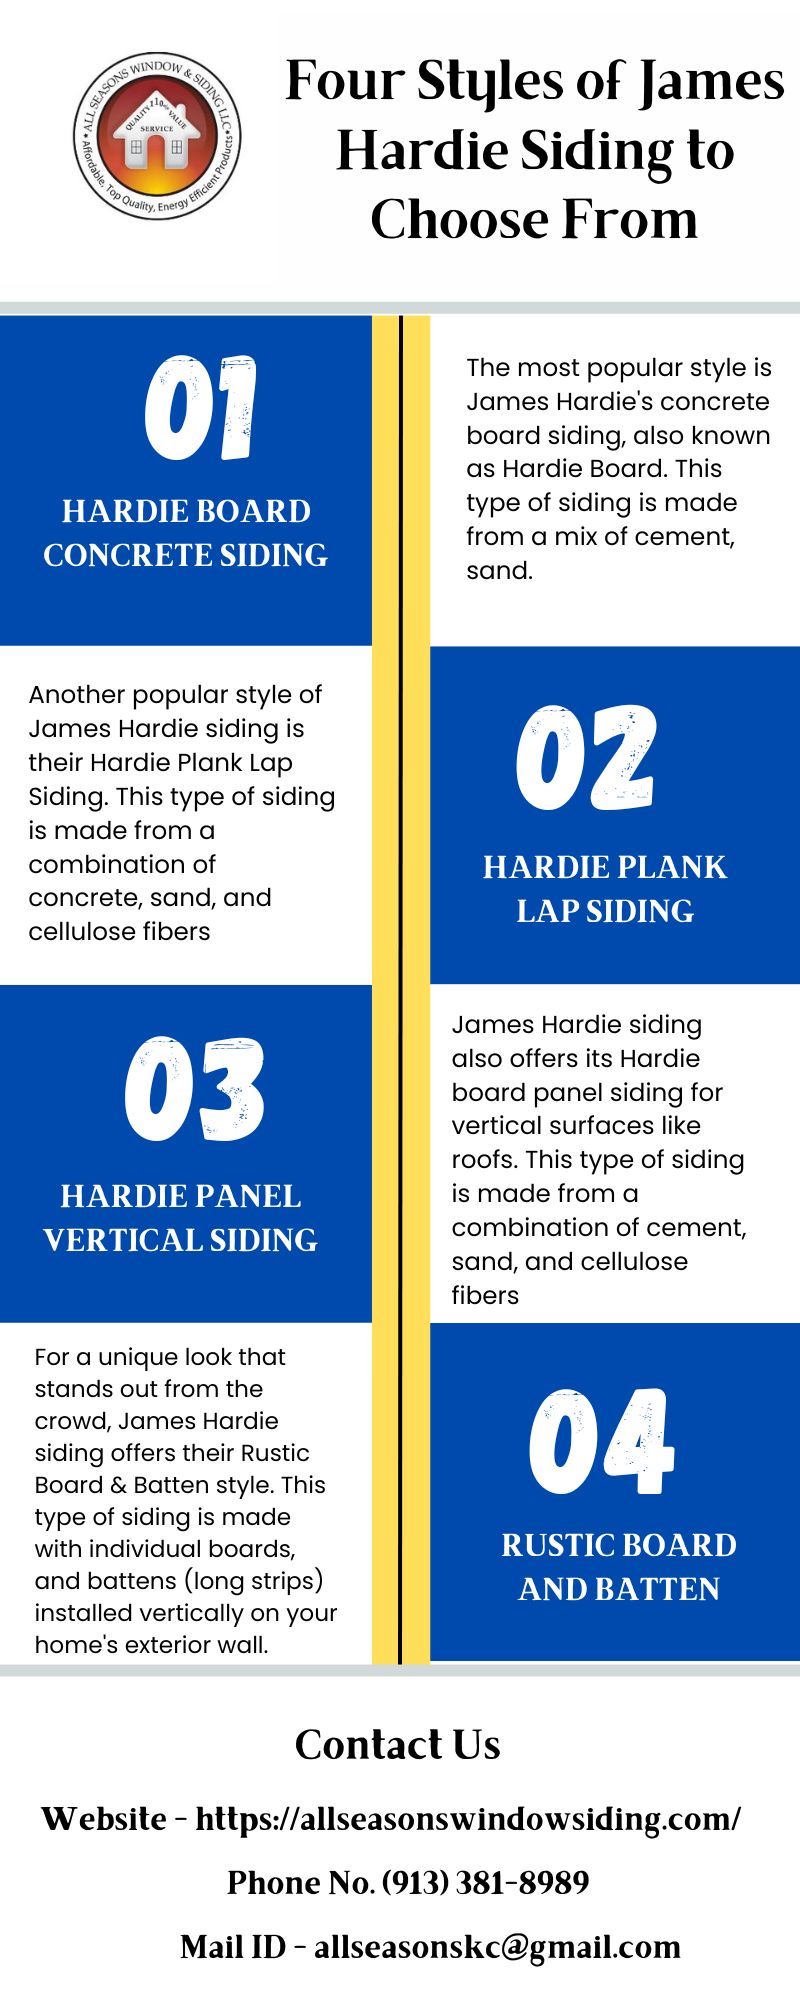 Four Styles of James Hardie Siding to Choose From